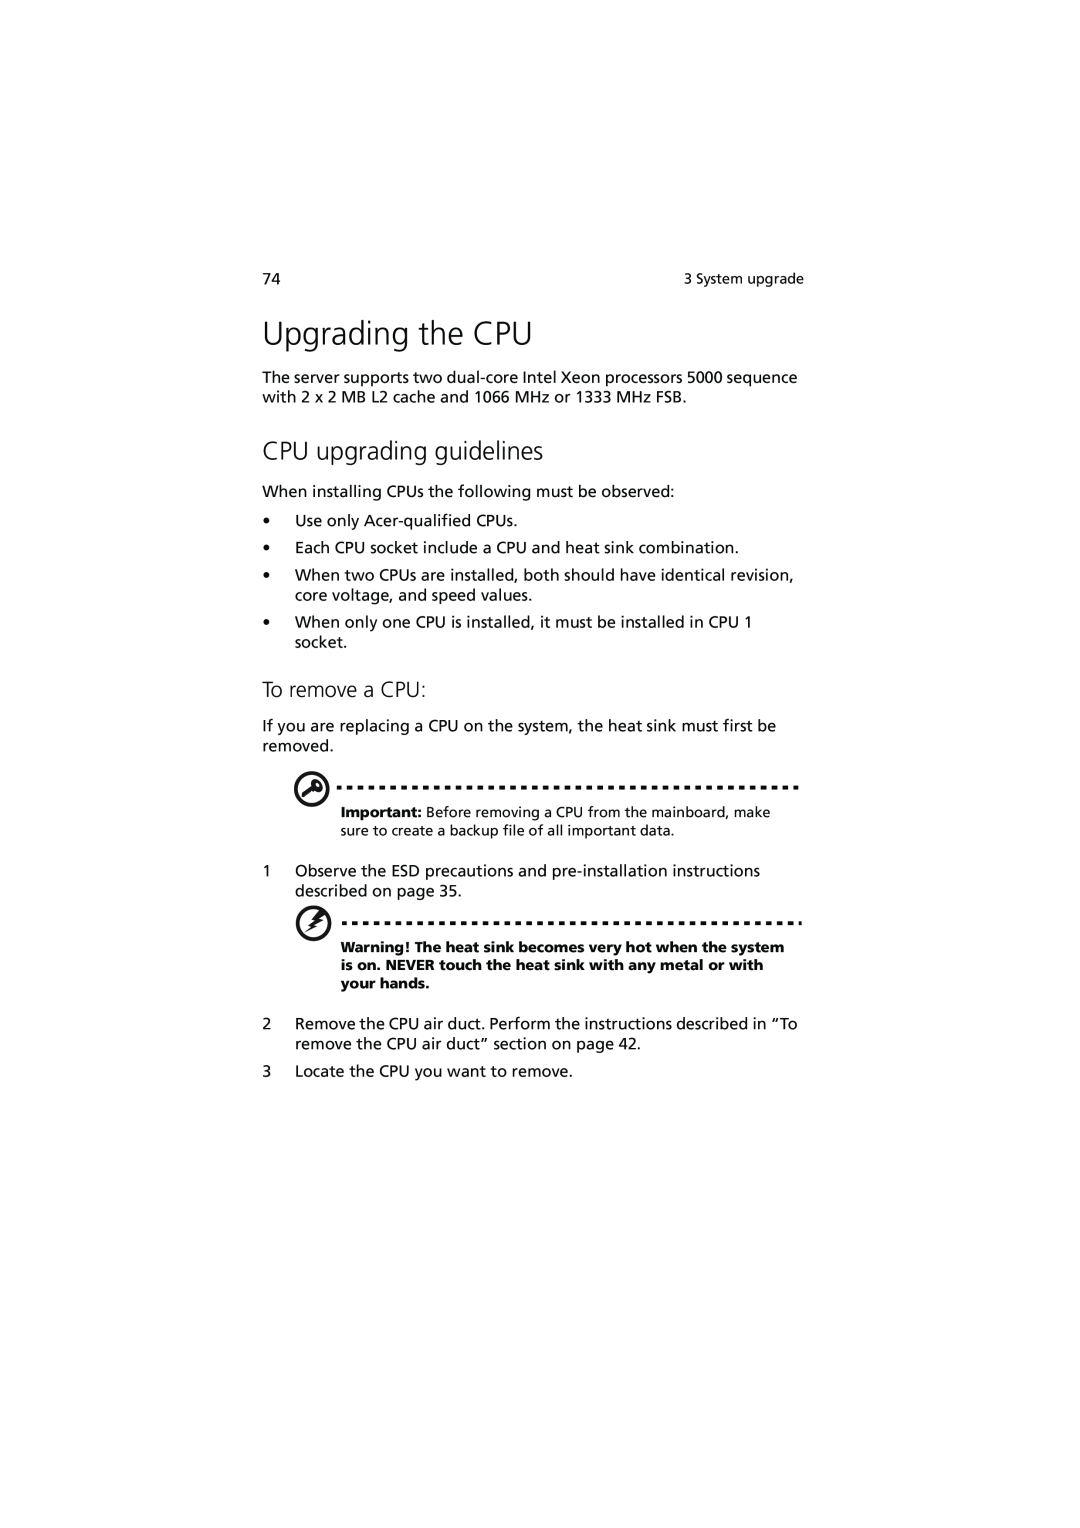 Acer R720 Series manual Upgrading the CPU, CPU upgrading guidelines, To remove a CPU 